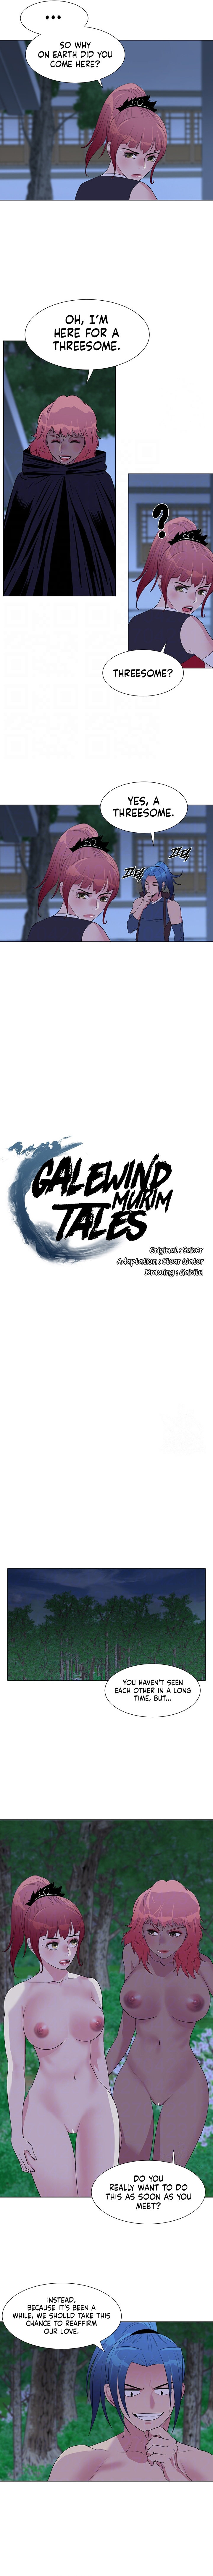 Galewind Murim Tales - Chapter 34 Page 2